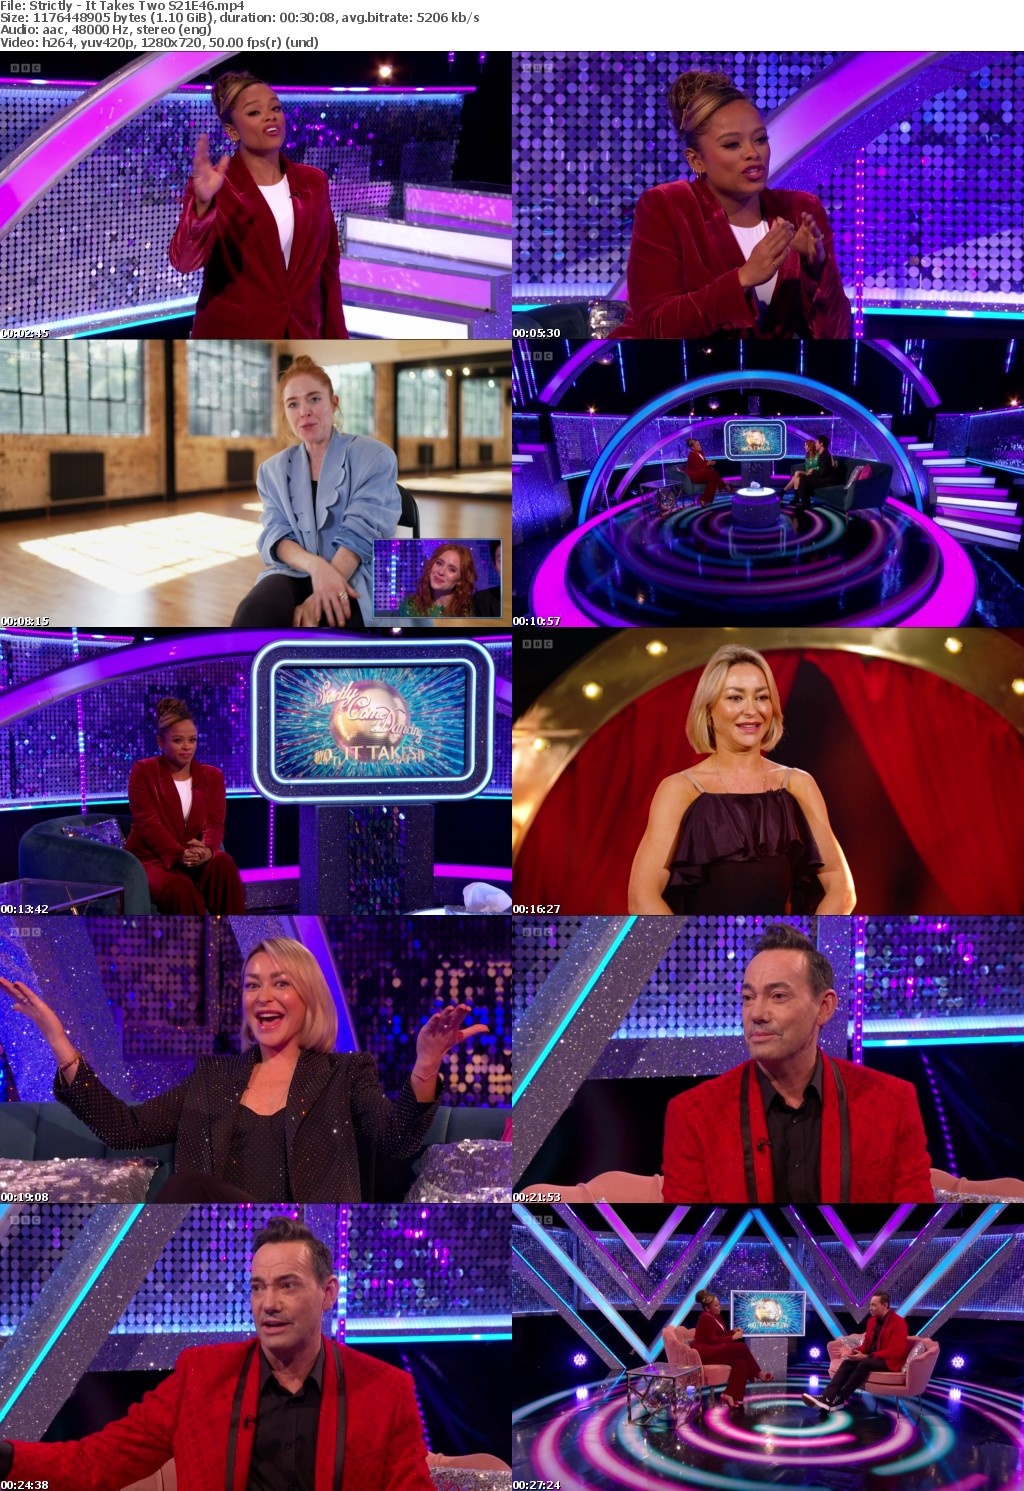 Strictly - It Takes Two S21E46 (1280x720p HD, 50fps, soft Eng subs)